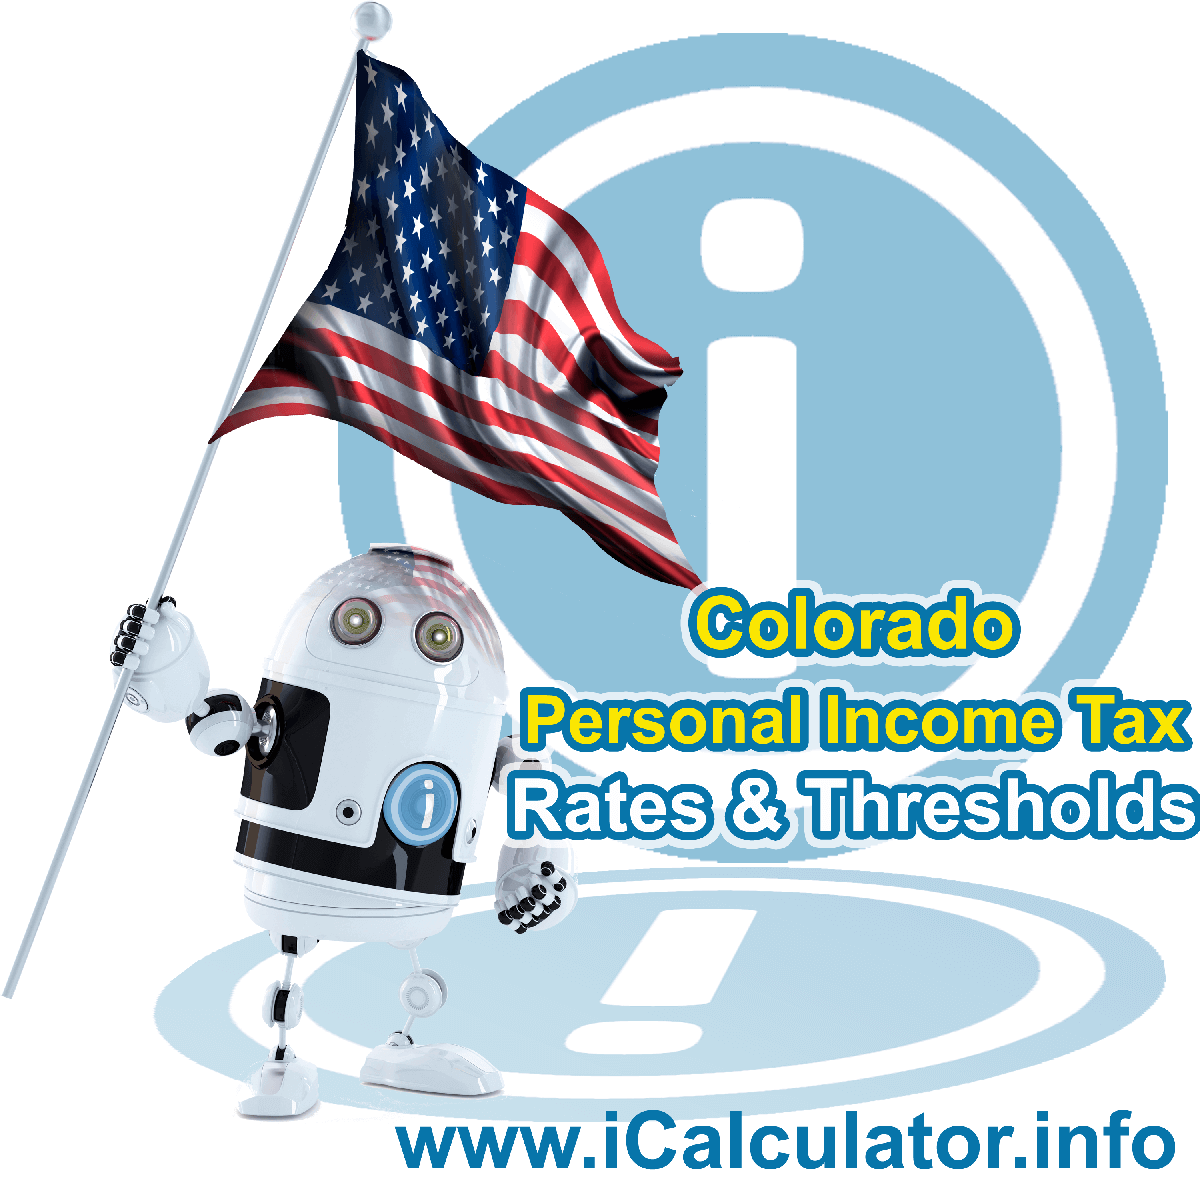 Colorado State Tax Tables 2017. This image displays details of the Colorado State Tax Tables for the 2017 tax return year which is provided in support of the 2017 US Tax Calculator